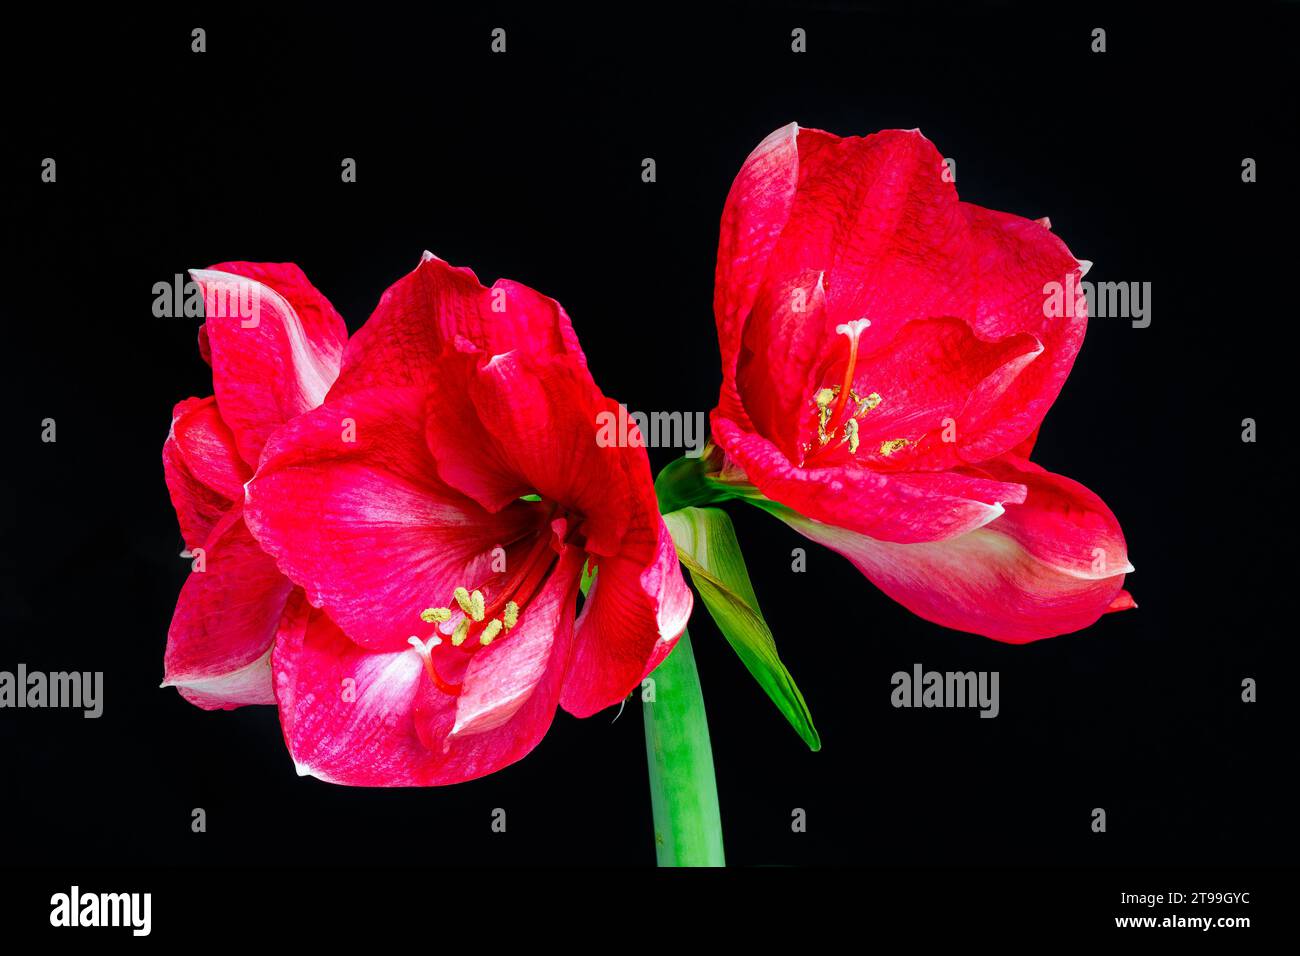 Three Hippeastrum, or amaryllis, red and white flowers on a black background, close up Stock Photo